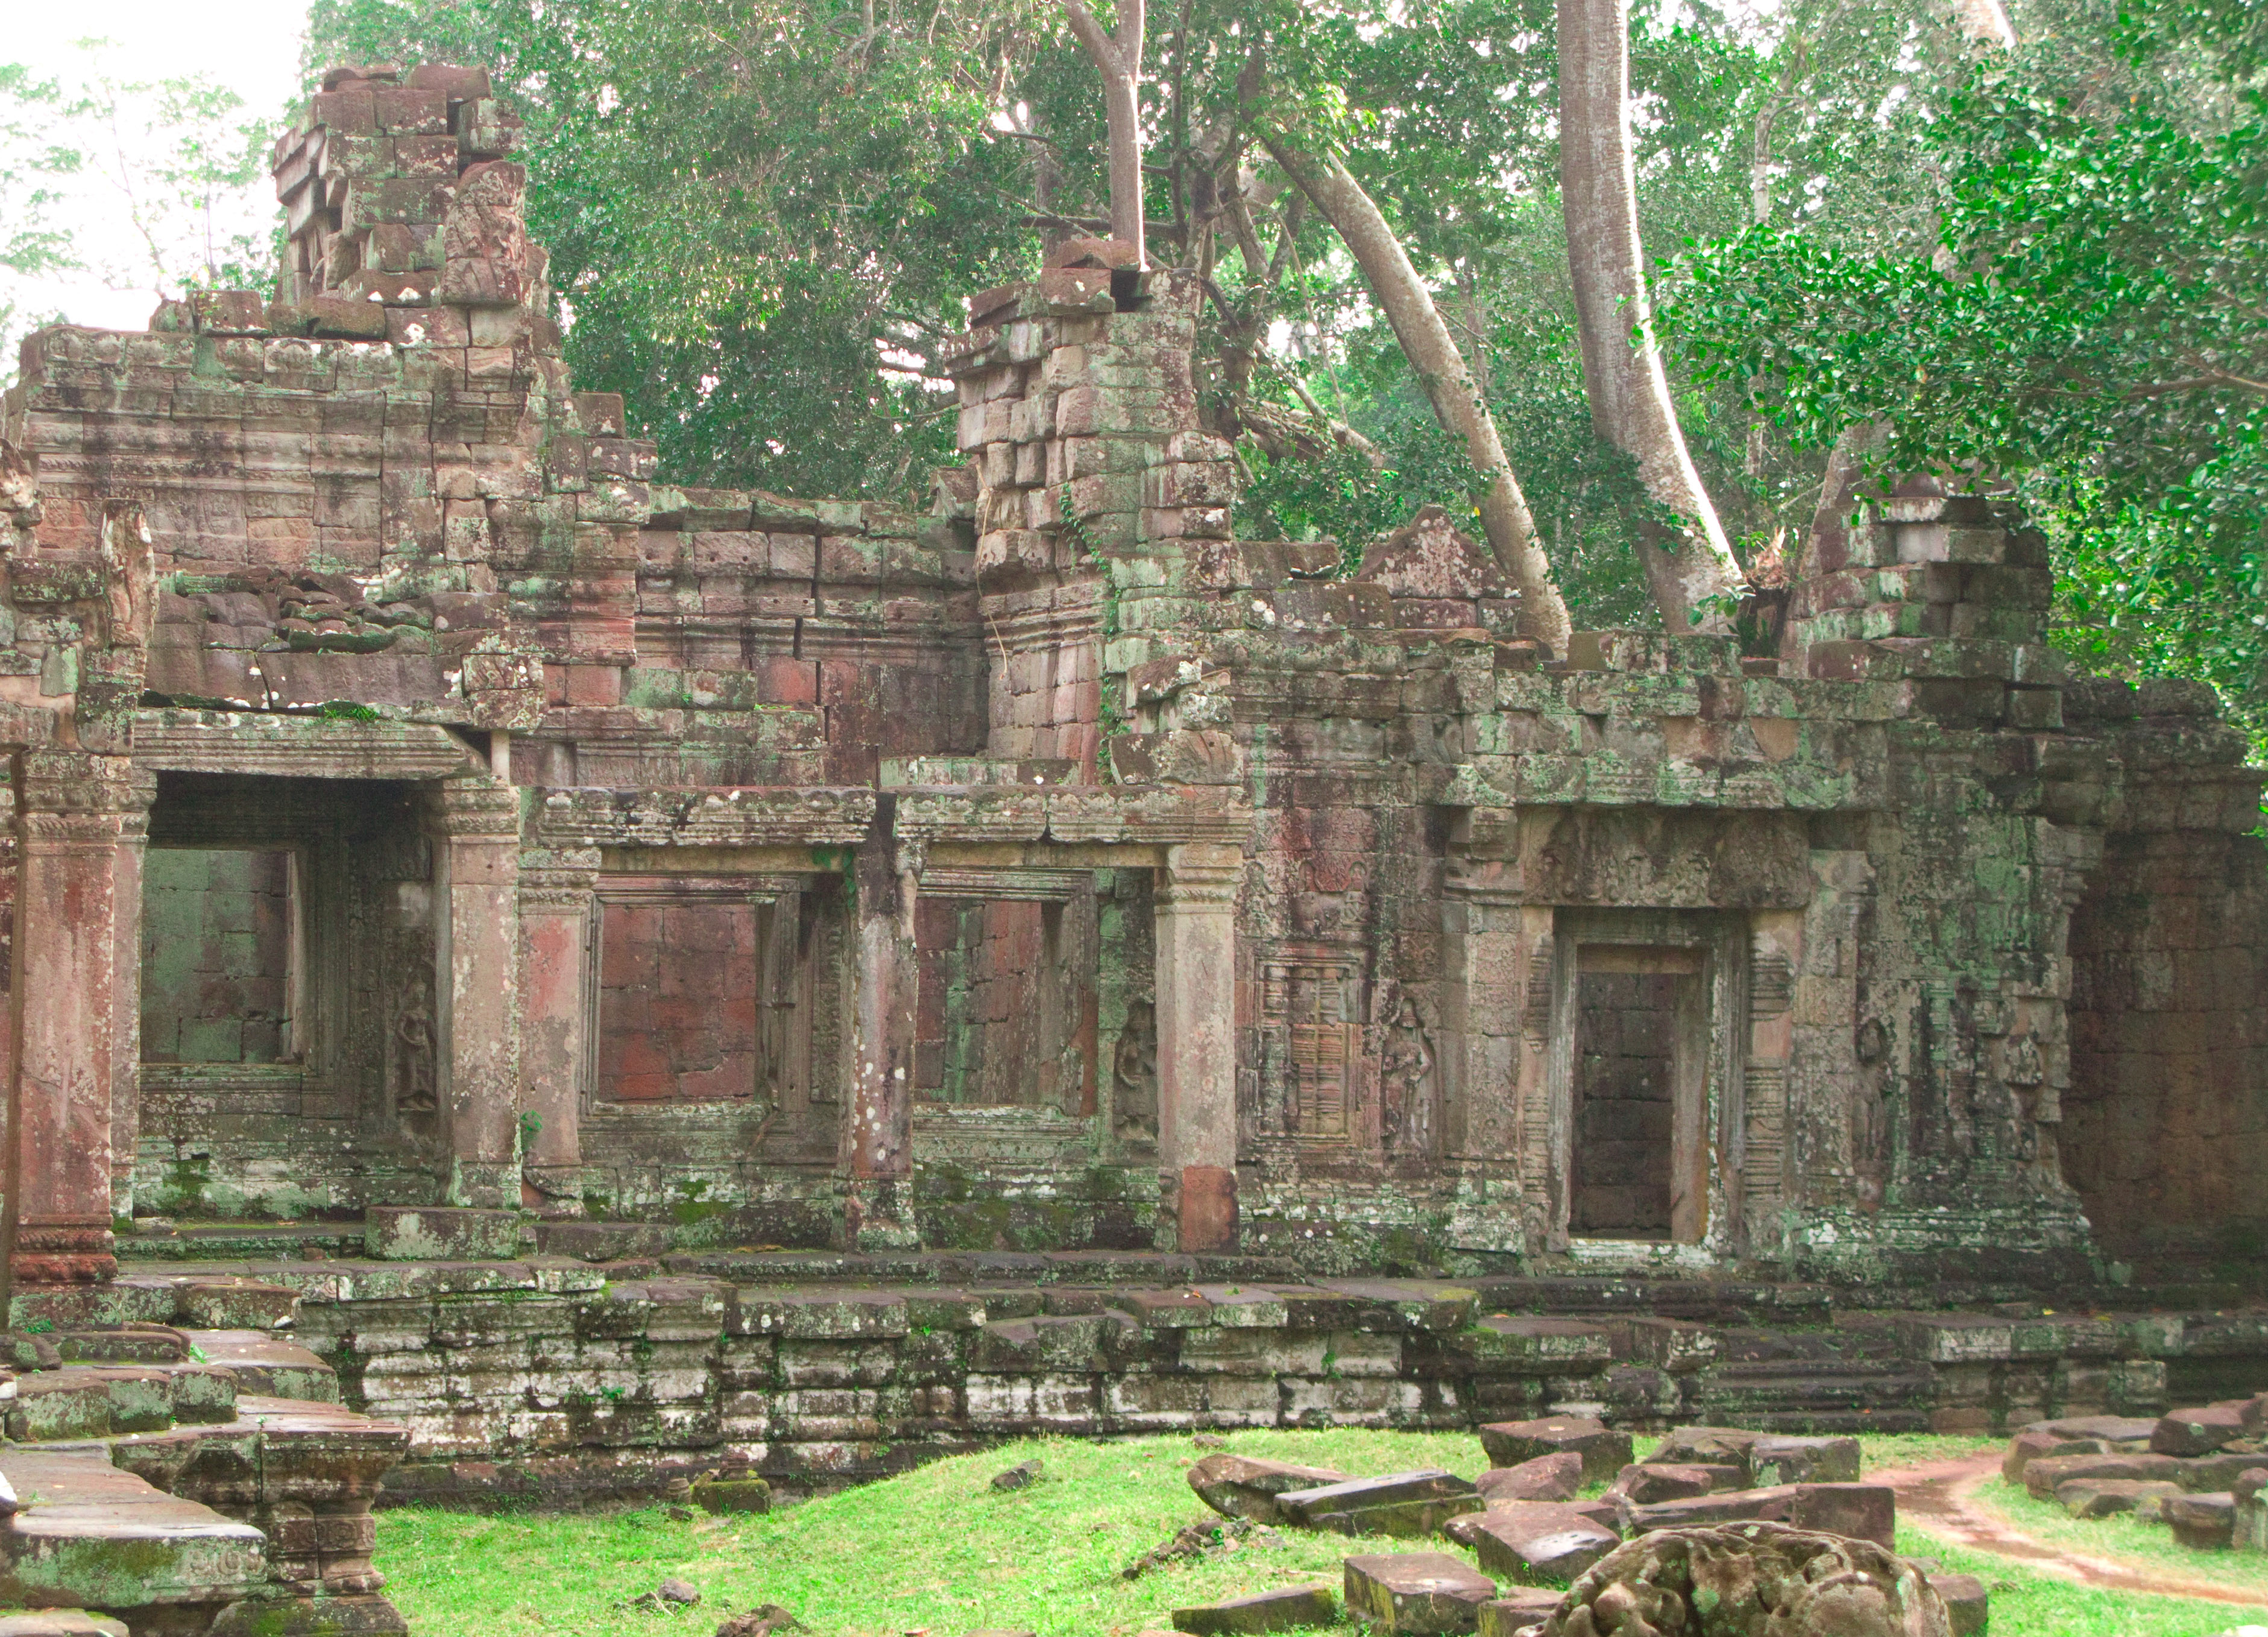 A temple at Siem Reap in Cambodia casts its spell when approached in silence.